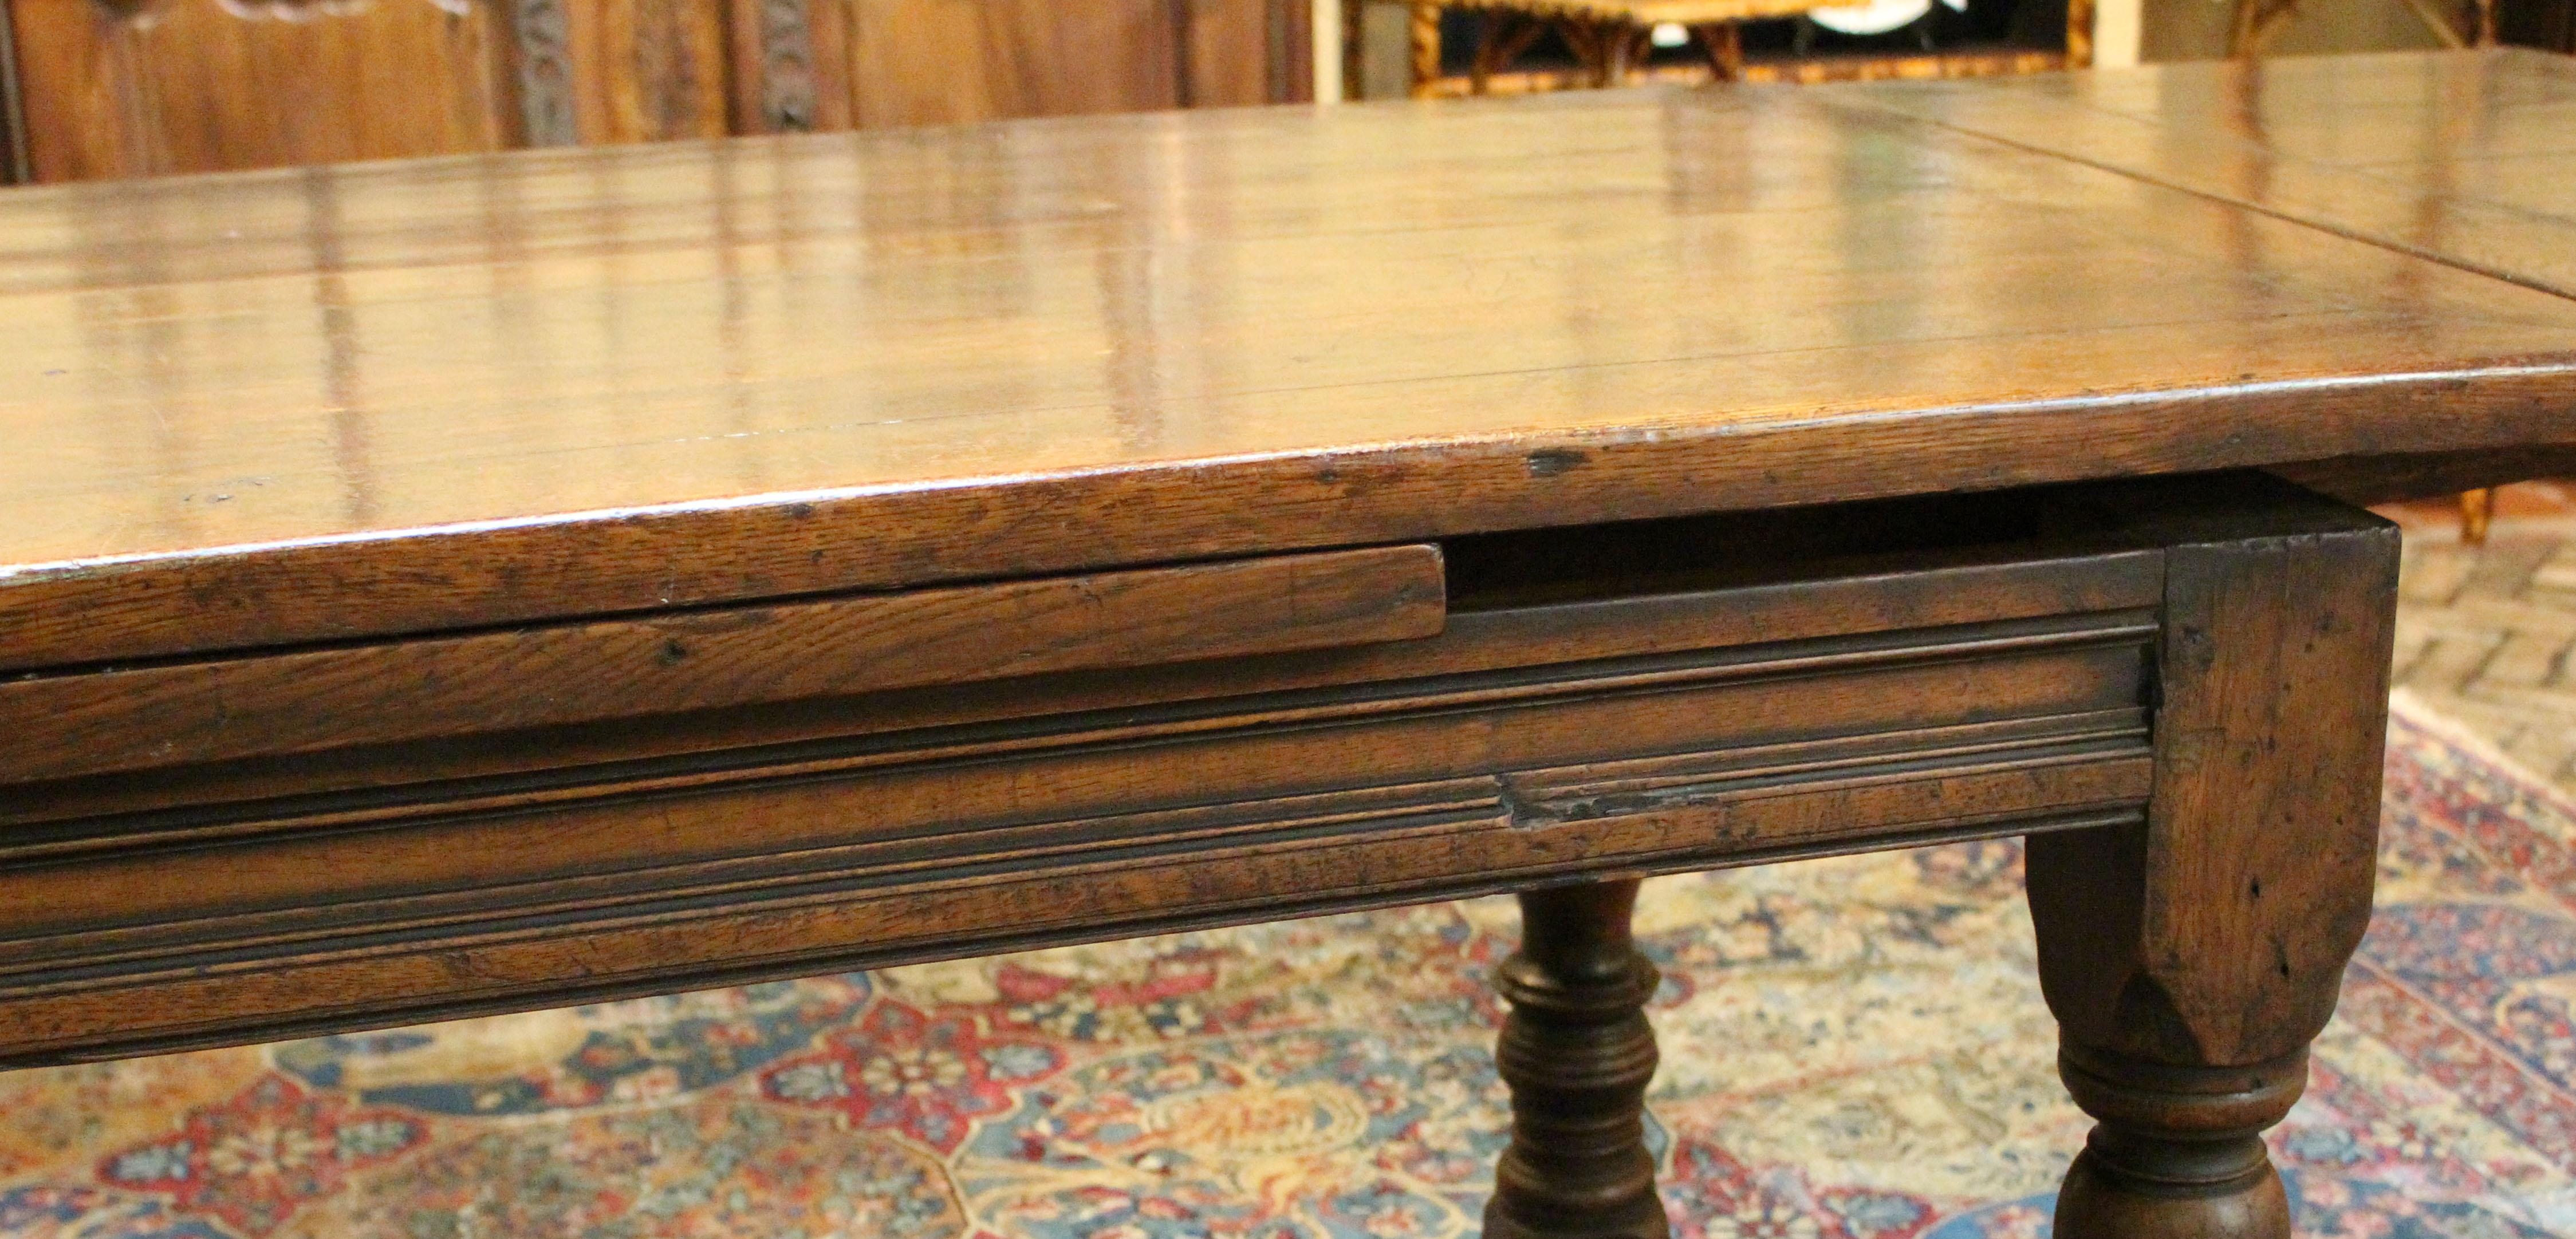 Circa 1860 Jacobean Revival Style Draw Leaf Table In Good Condition For Sale In Chapel Hill, NC